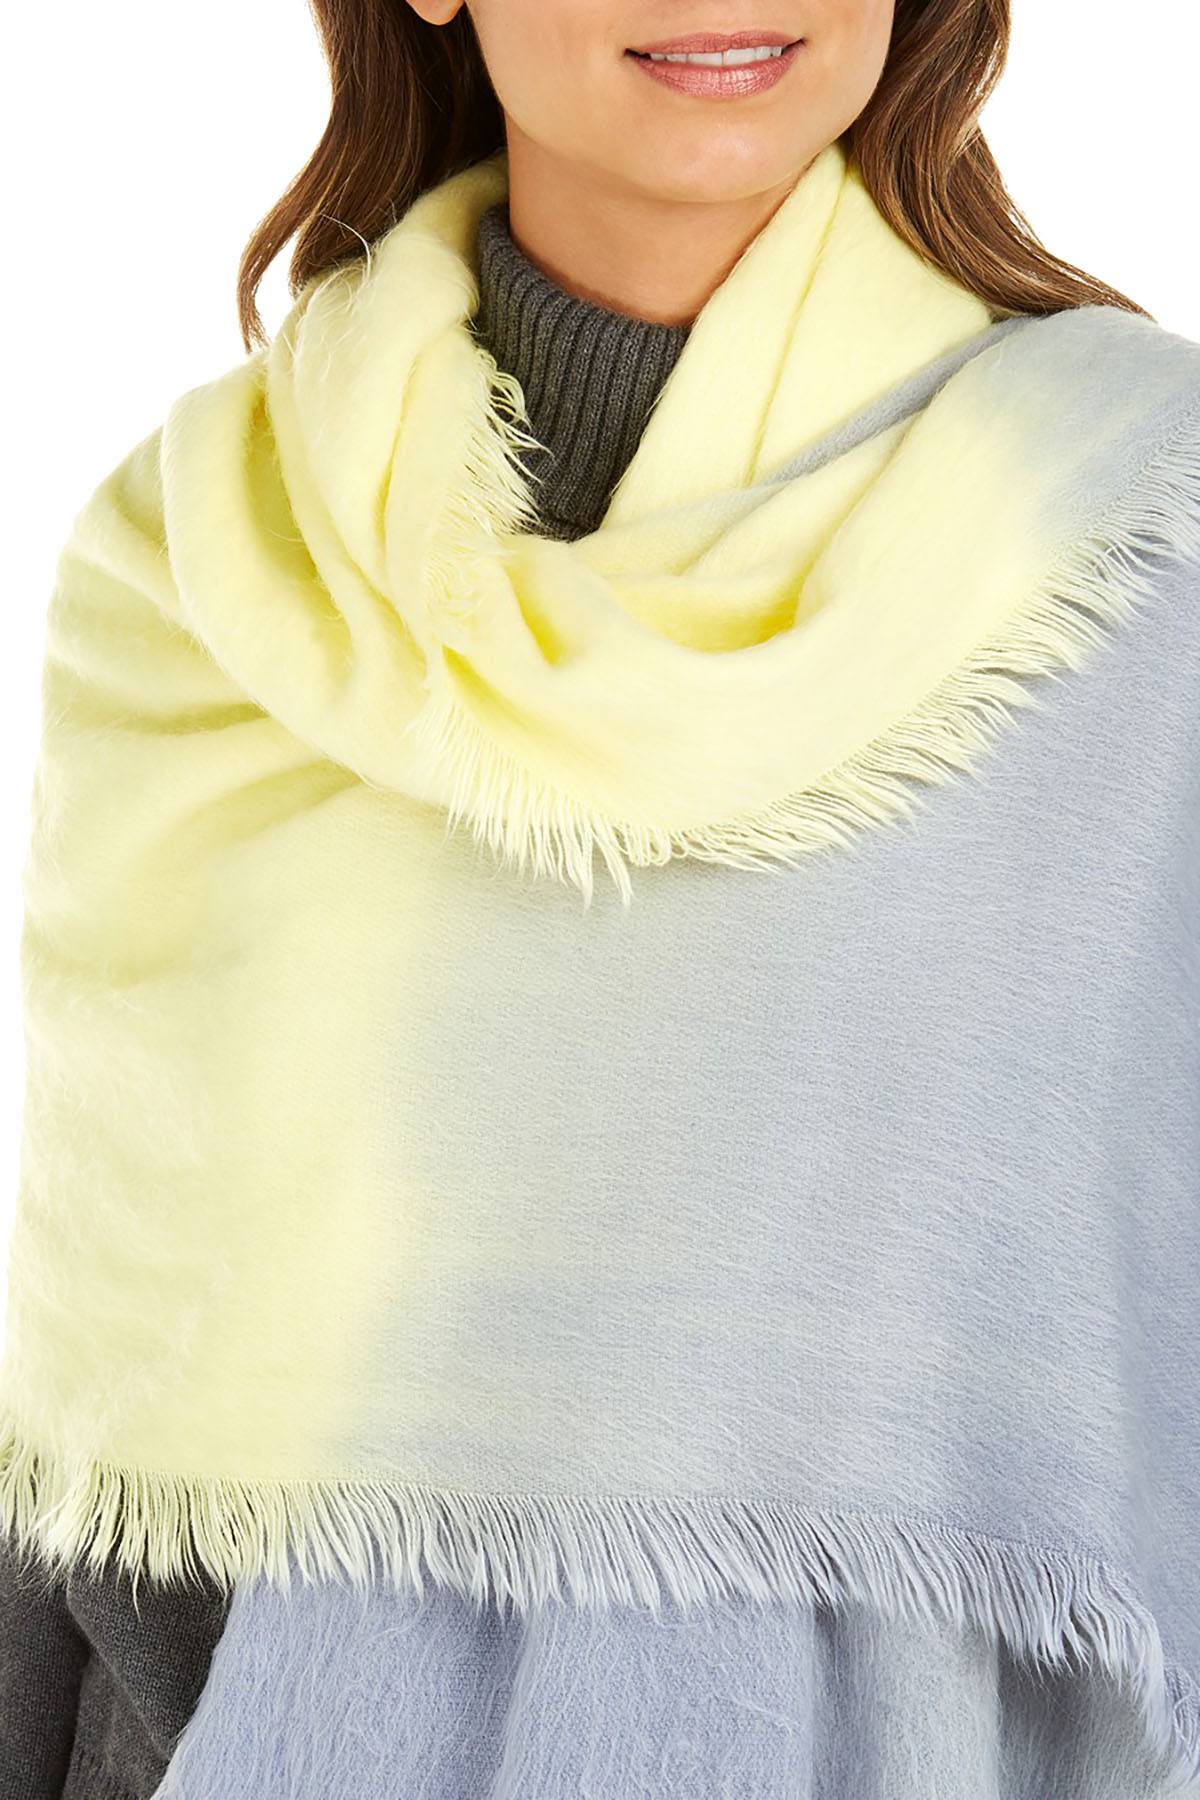 DKNY Neon Yellow Woven Ombré Scarf